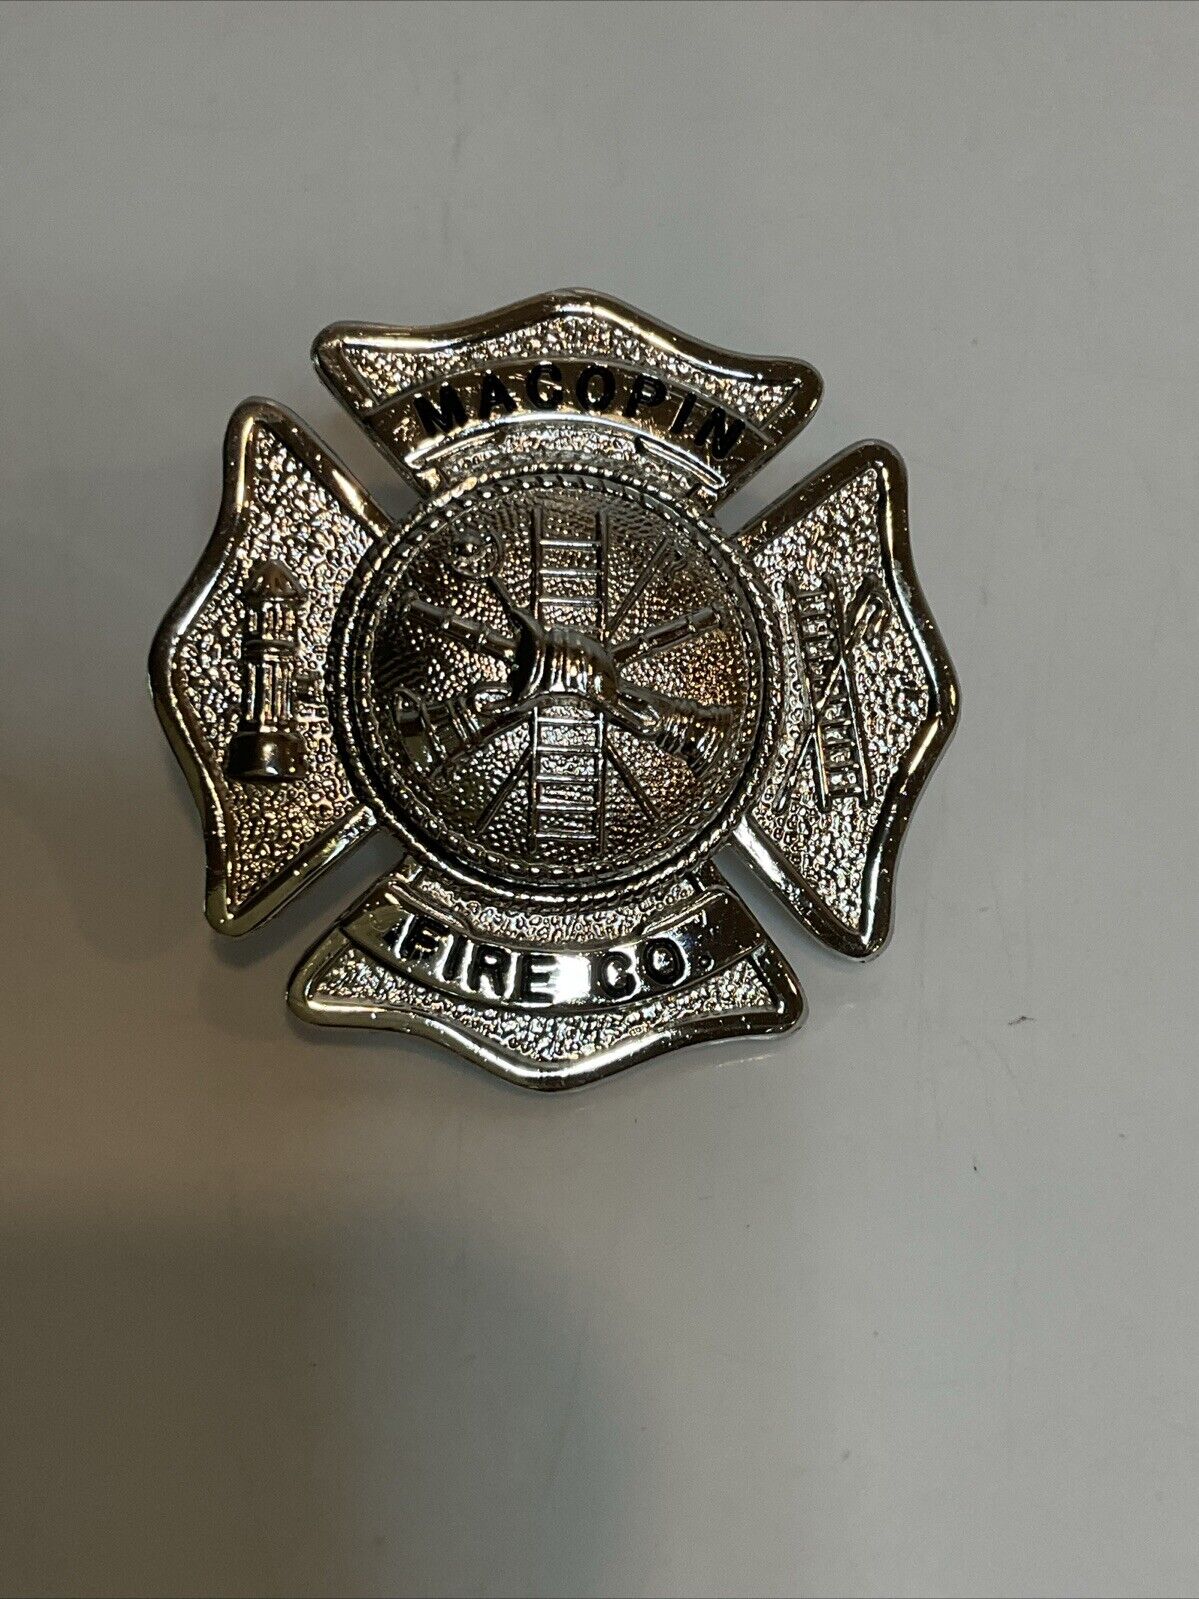 Rare VINTAGE OBSOLETE Macopin FIRE DEPARTMENT BADGE PIN Nice